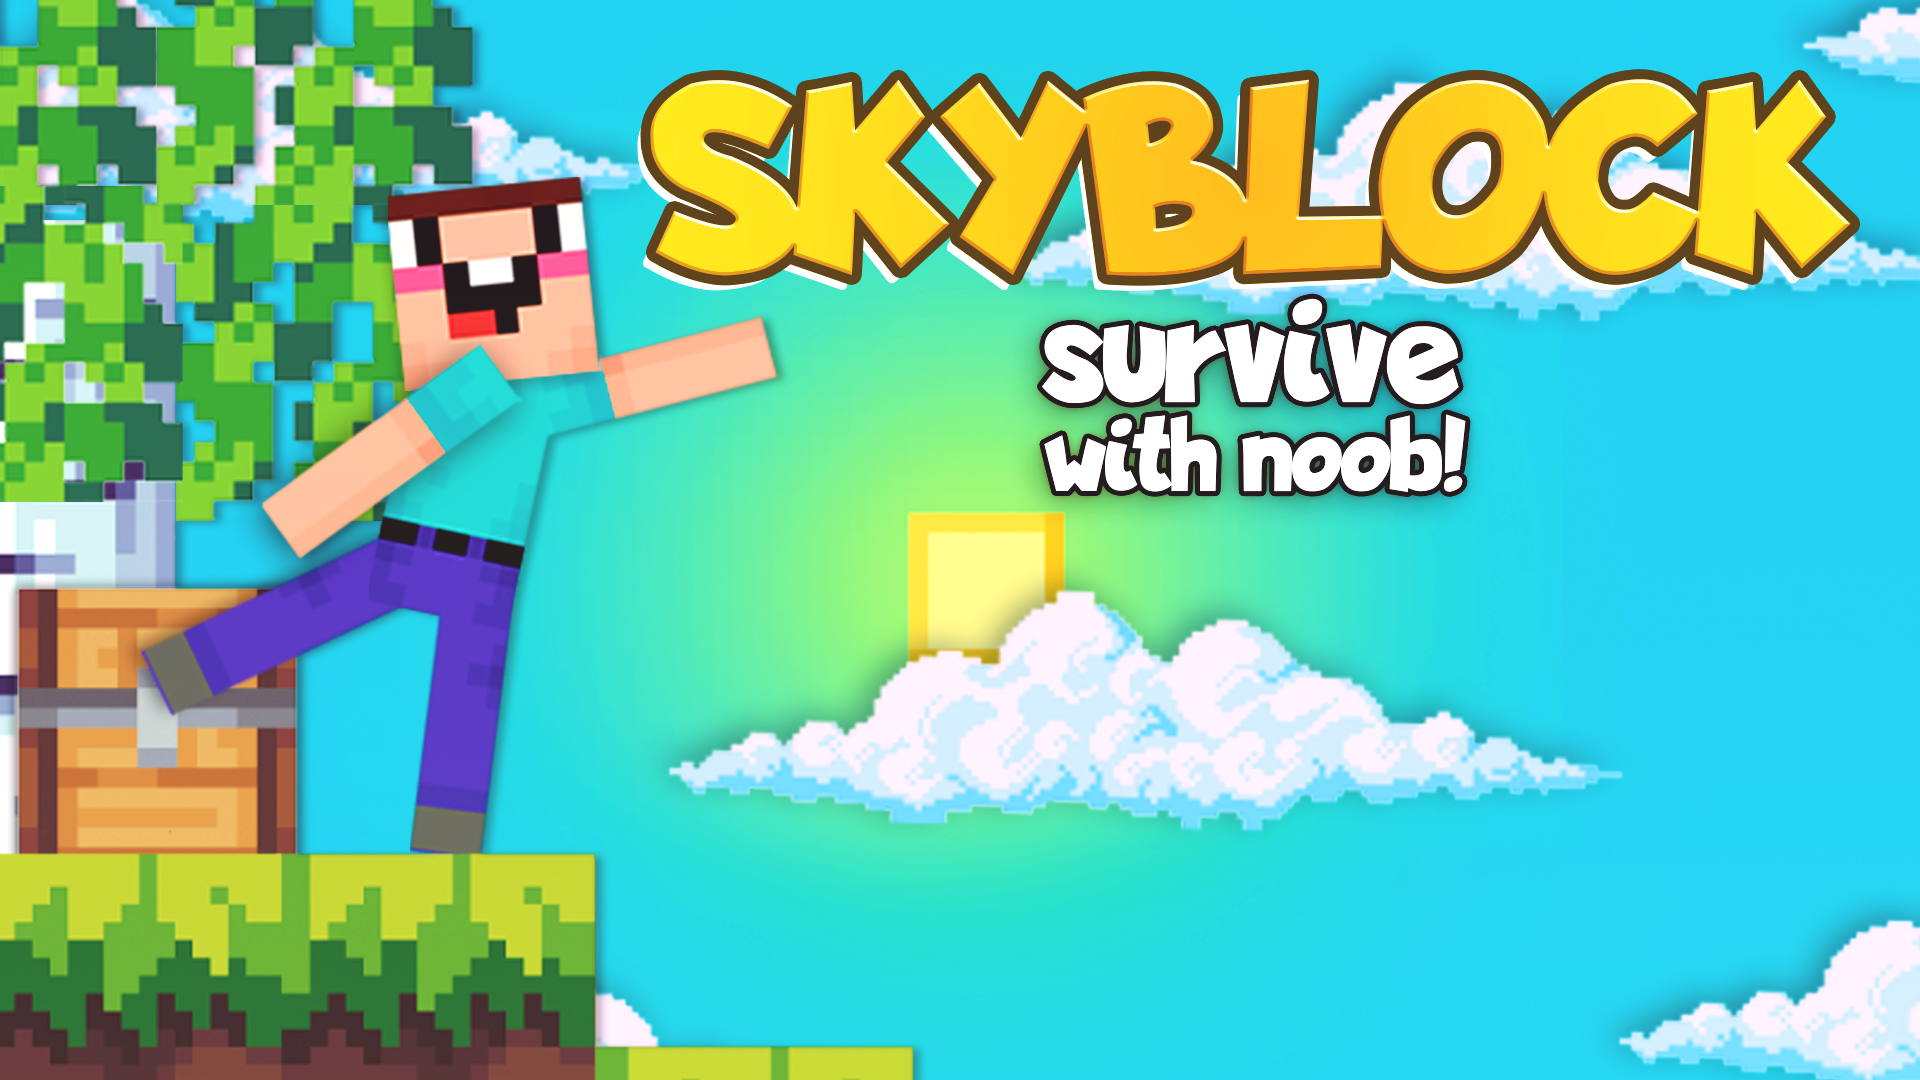 Skyblock Survive With Noob! Game Image